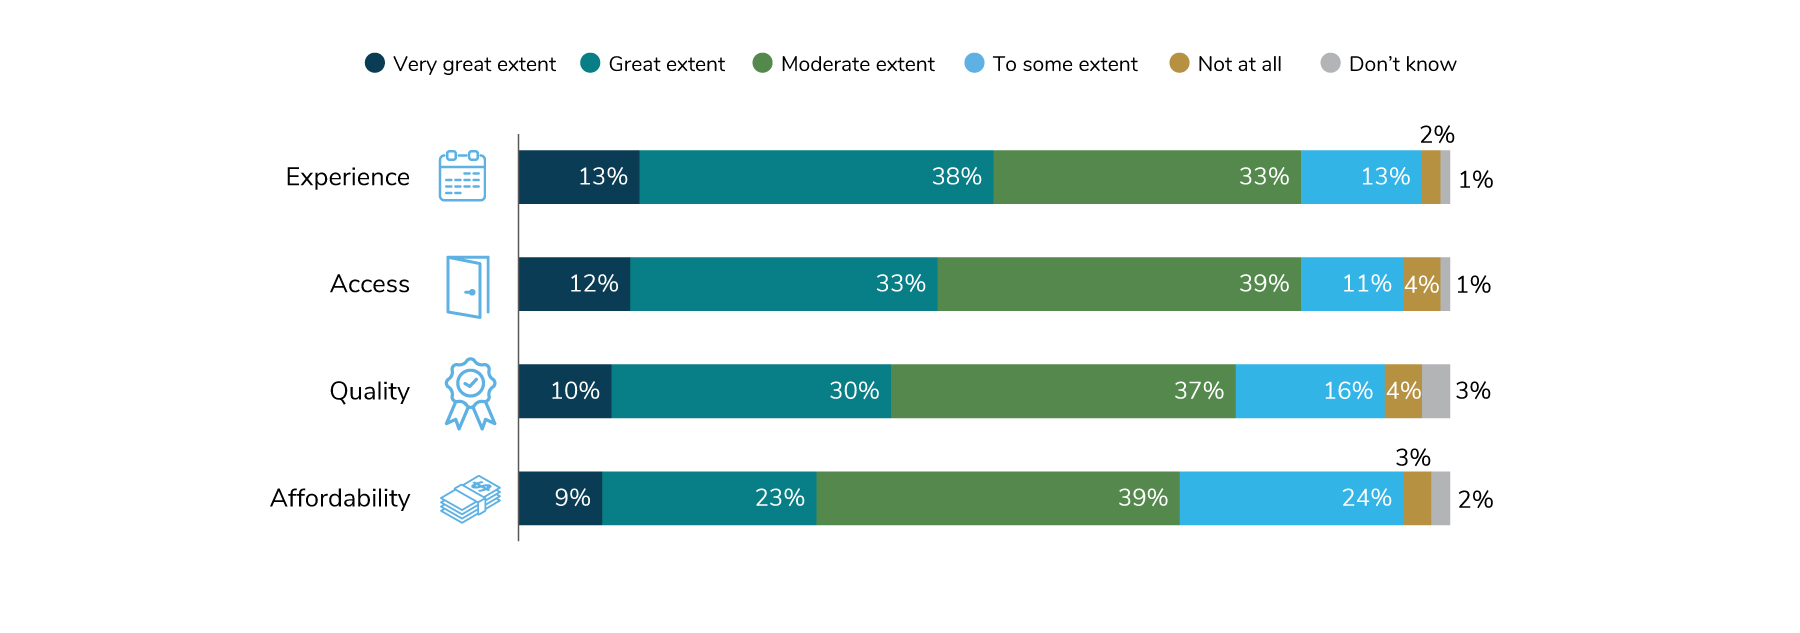 Over the  last 3 years, employers believe they have to a great extent improved employee's experience (51%), access (45%), quality (40%) and affordability (32%) of health care.